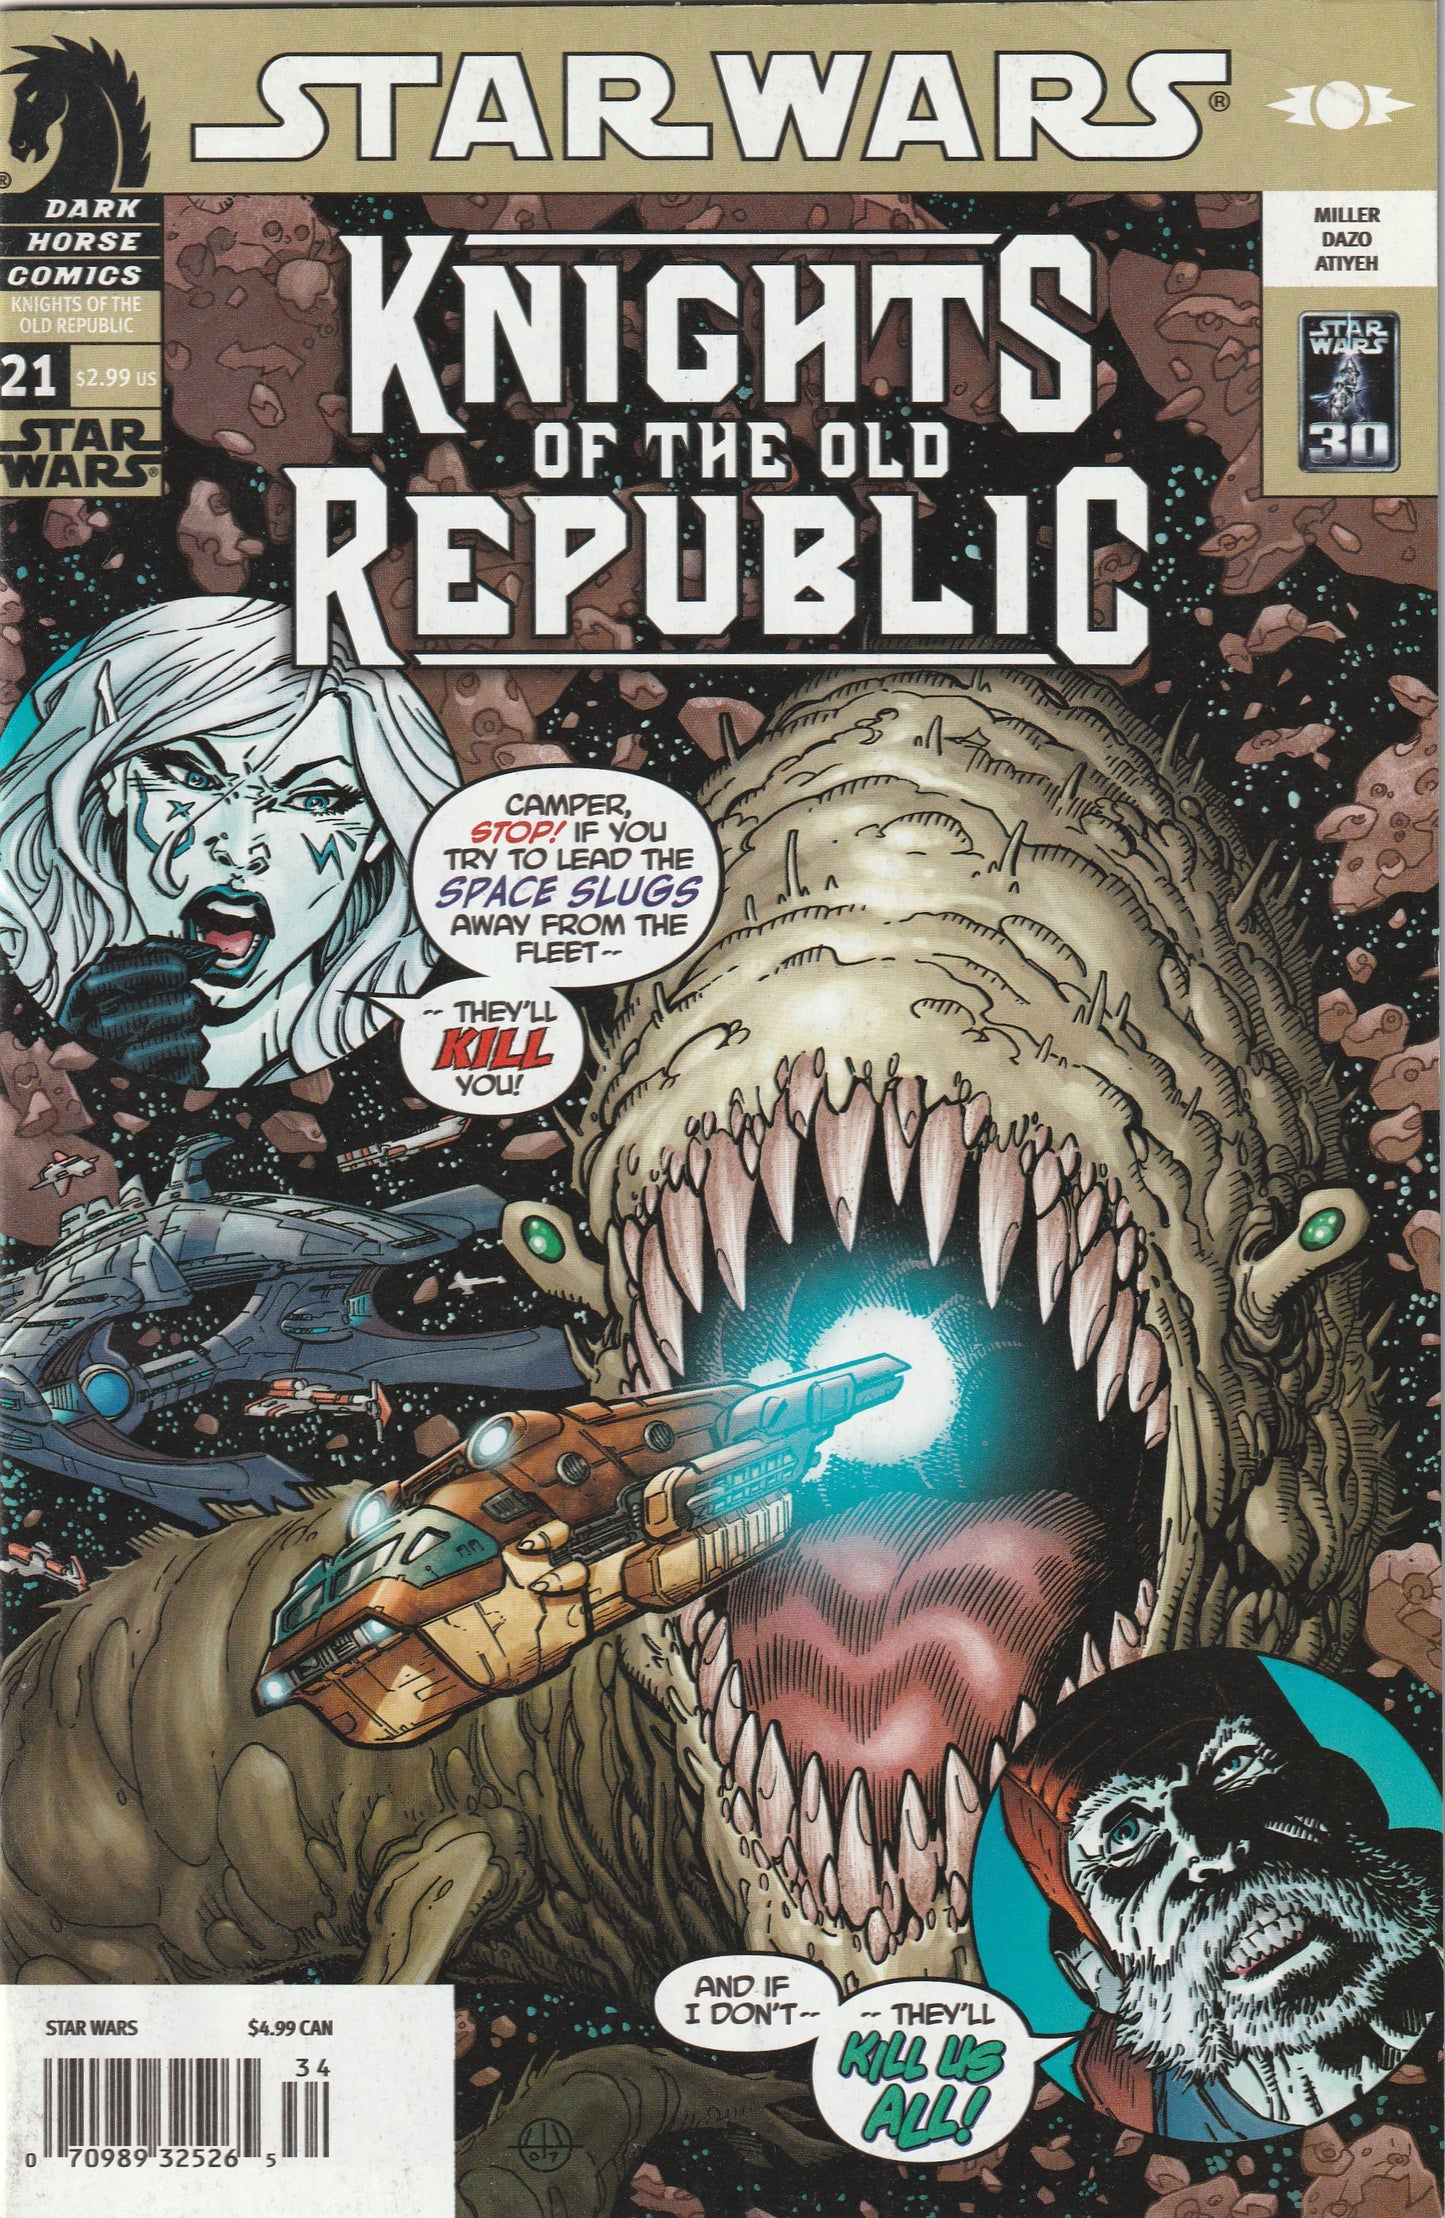 Star Wars Knights of the Old Republic #21 (2007)